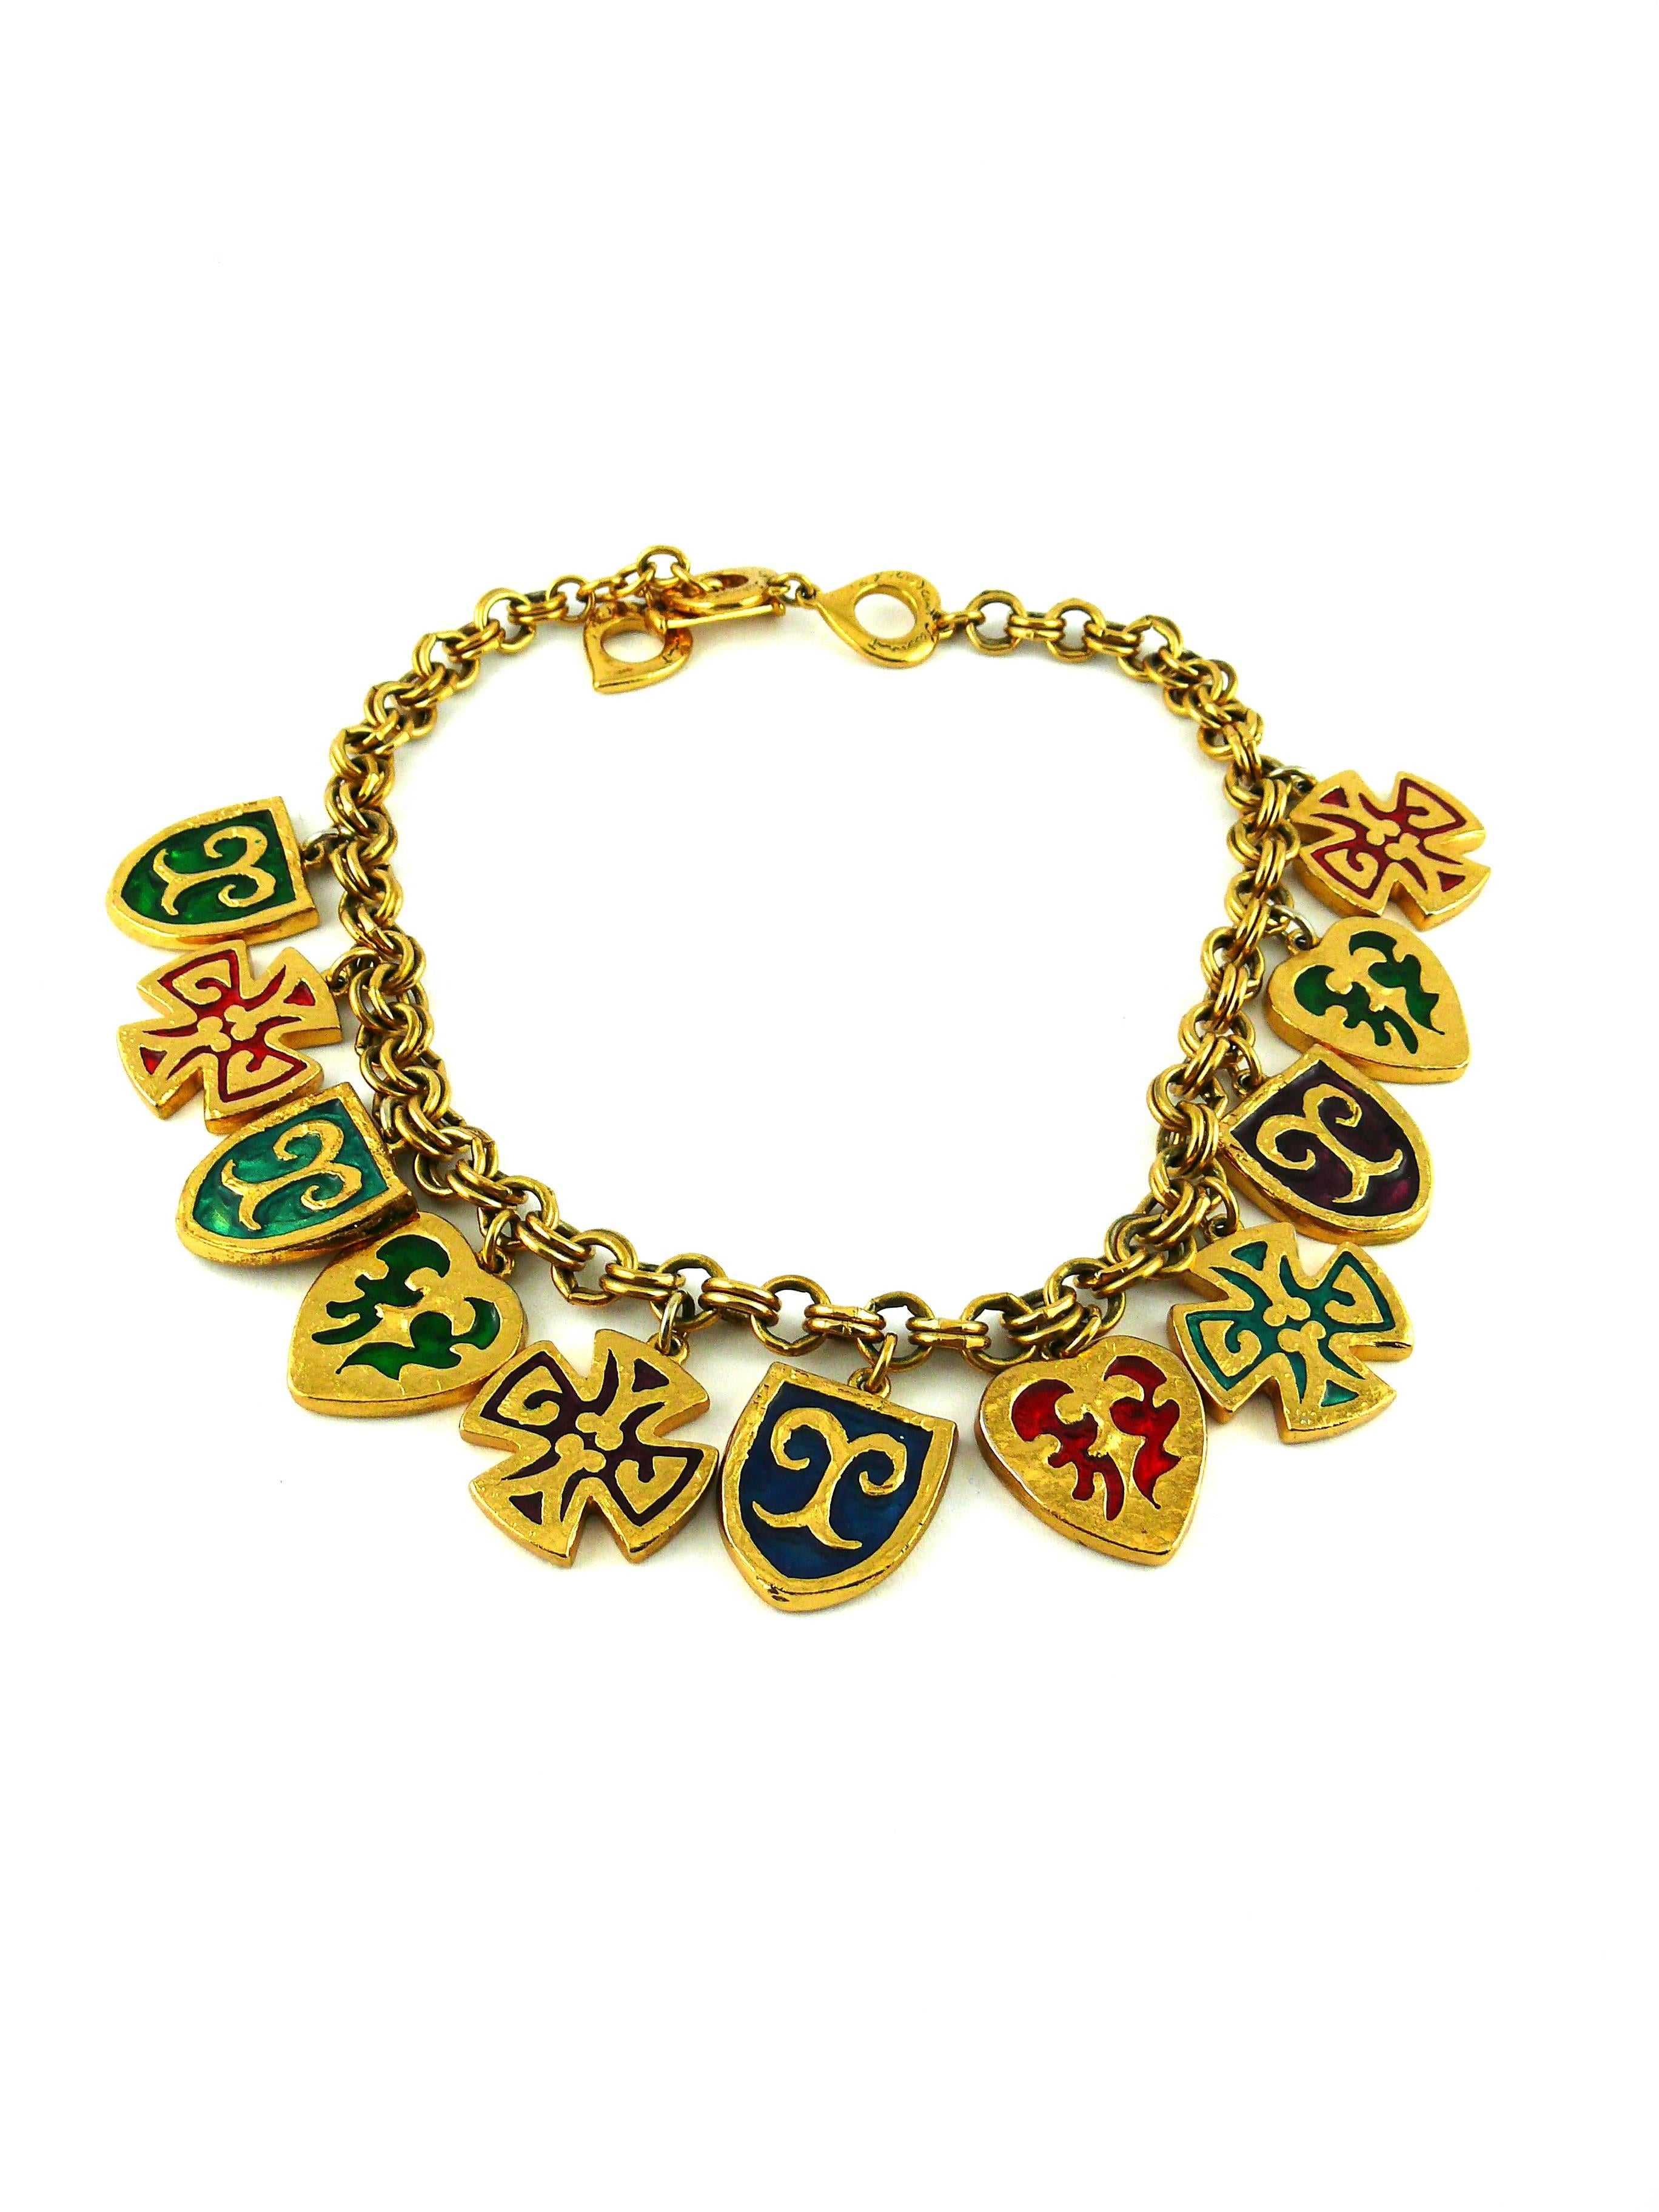 YVES SAINT LAURENT vintage rare multicolored enamel charm necklace. Created in the Ateliers of parurier ROBERT GOOSSENS.

Gold tone double link chain with enamel cross, heart and blazon charms.

Heart 